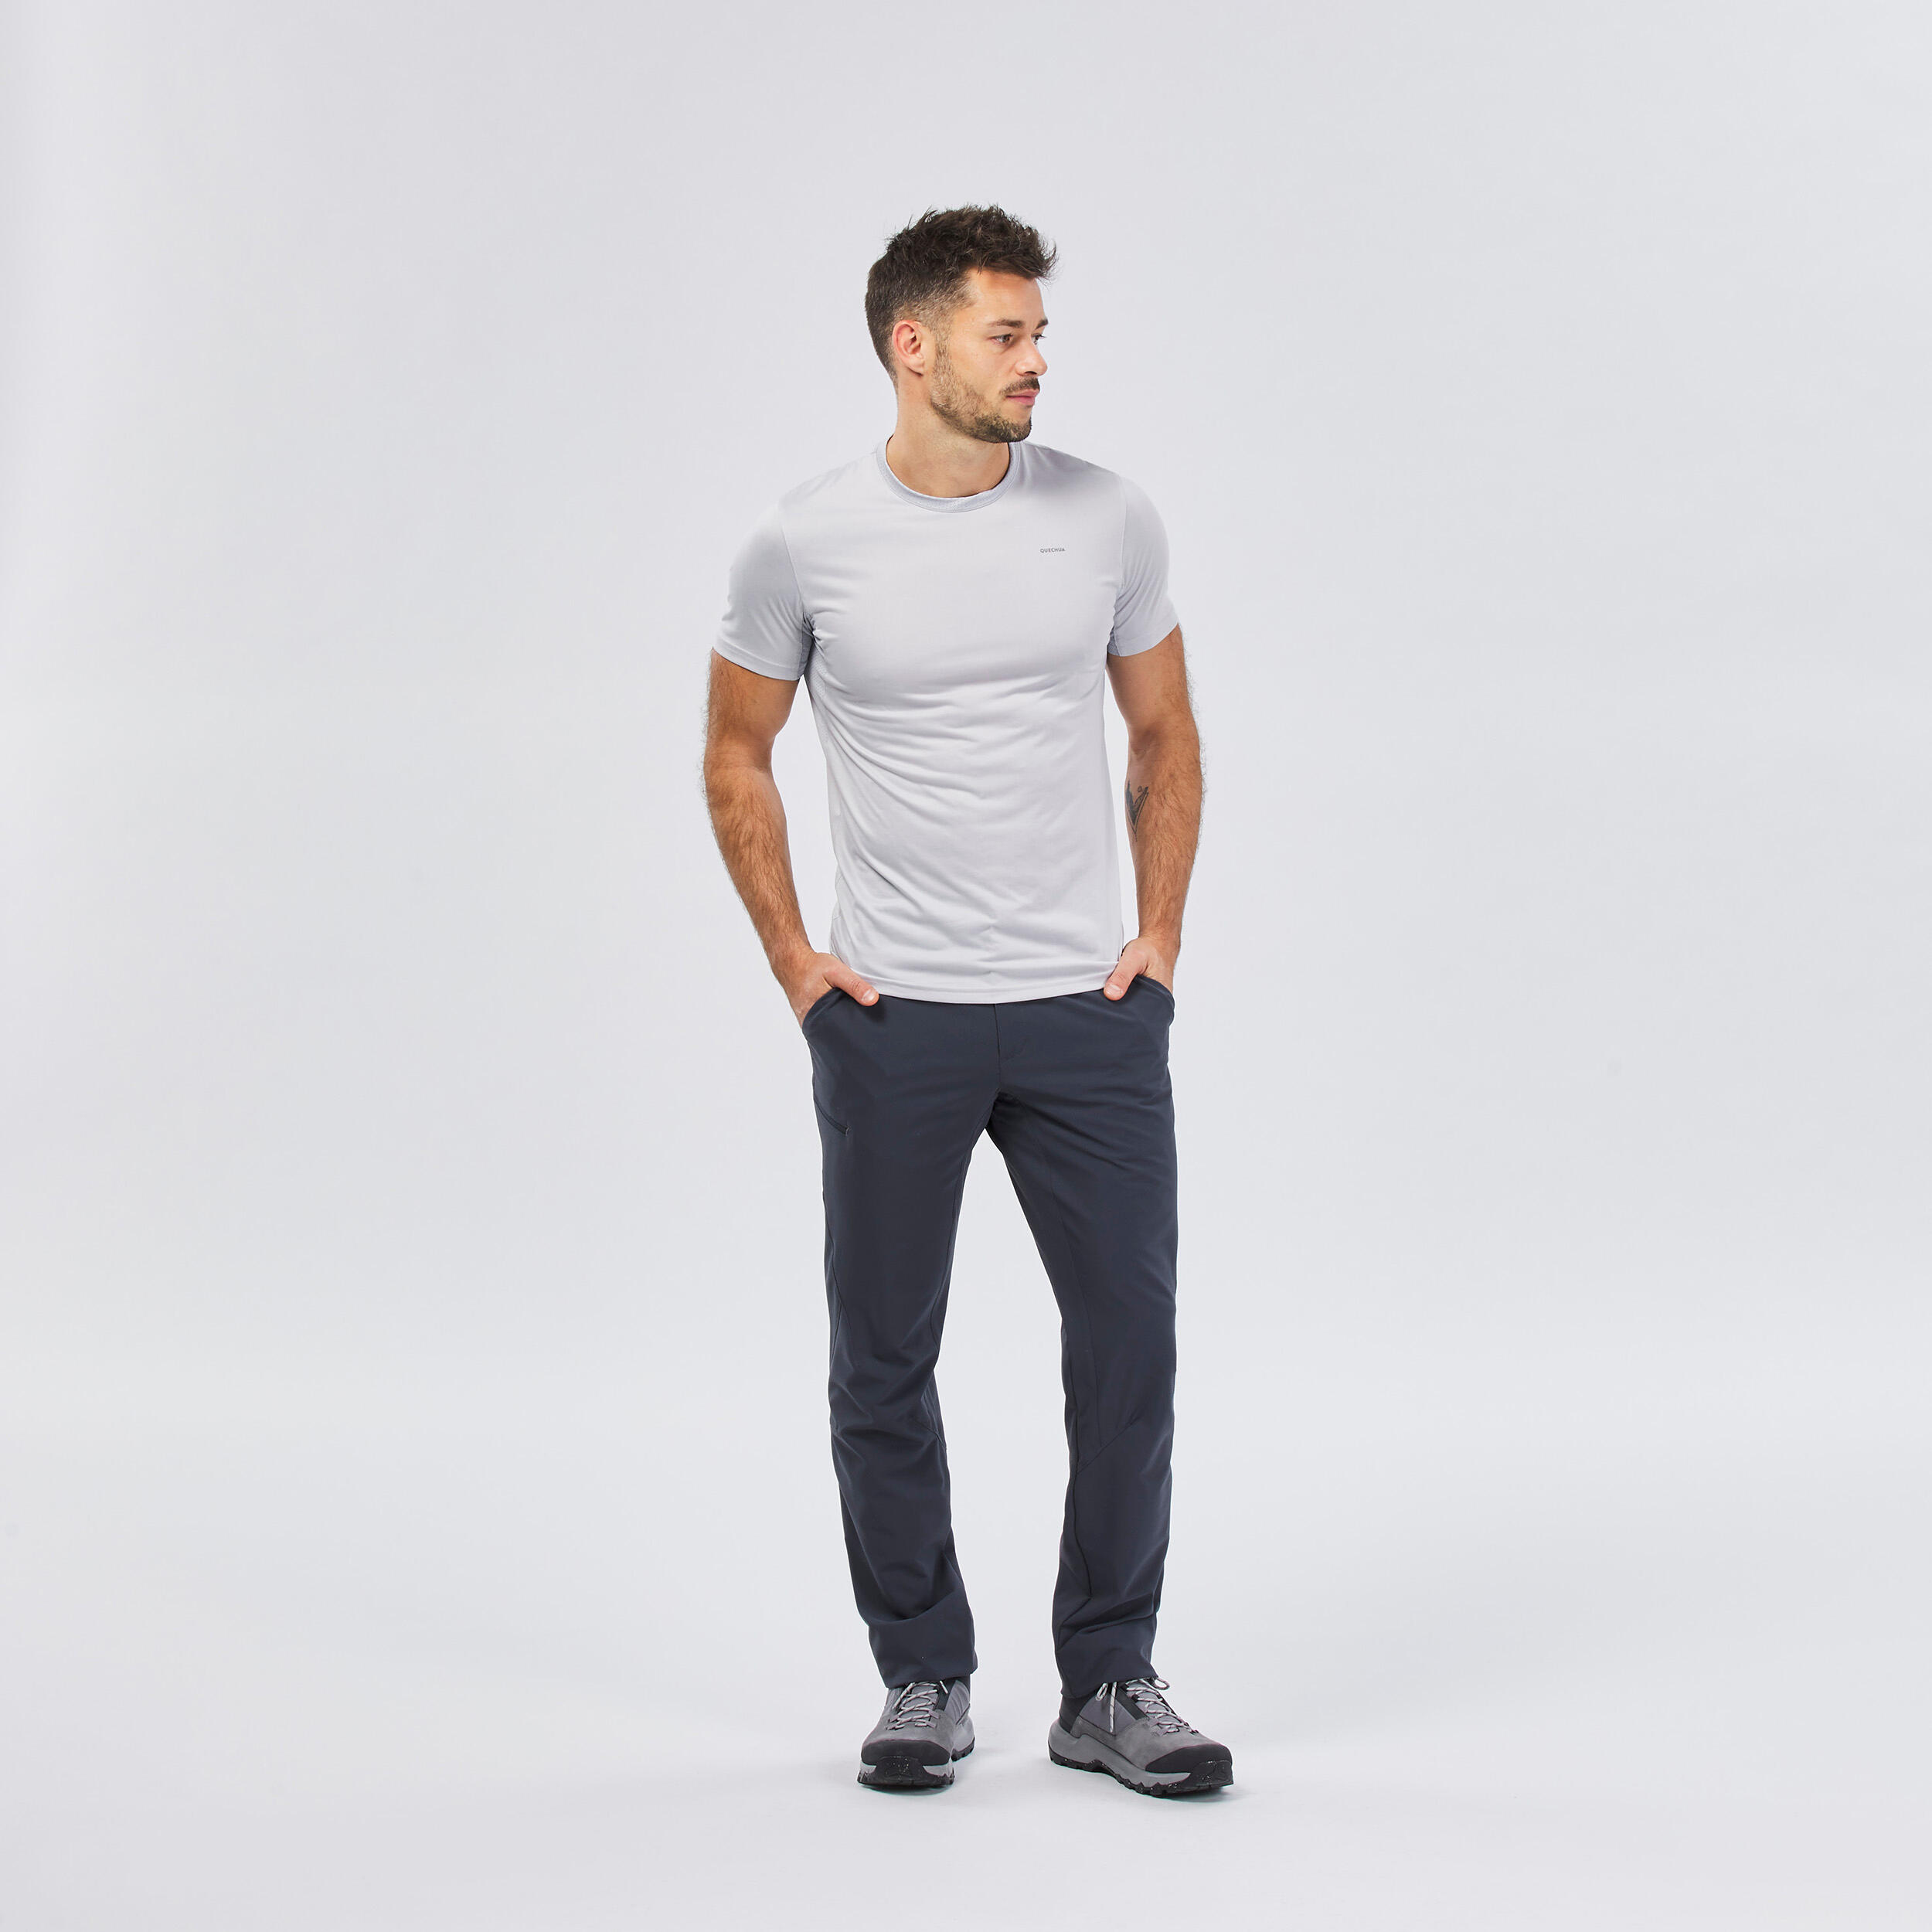 Grey Pants with Blue Shirt Outfits For Men In Their 20s 93 ideas   outfits  Lookastic